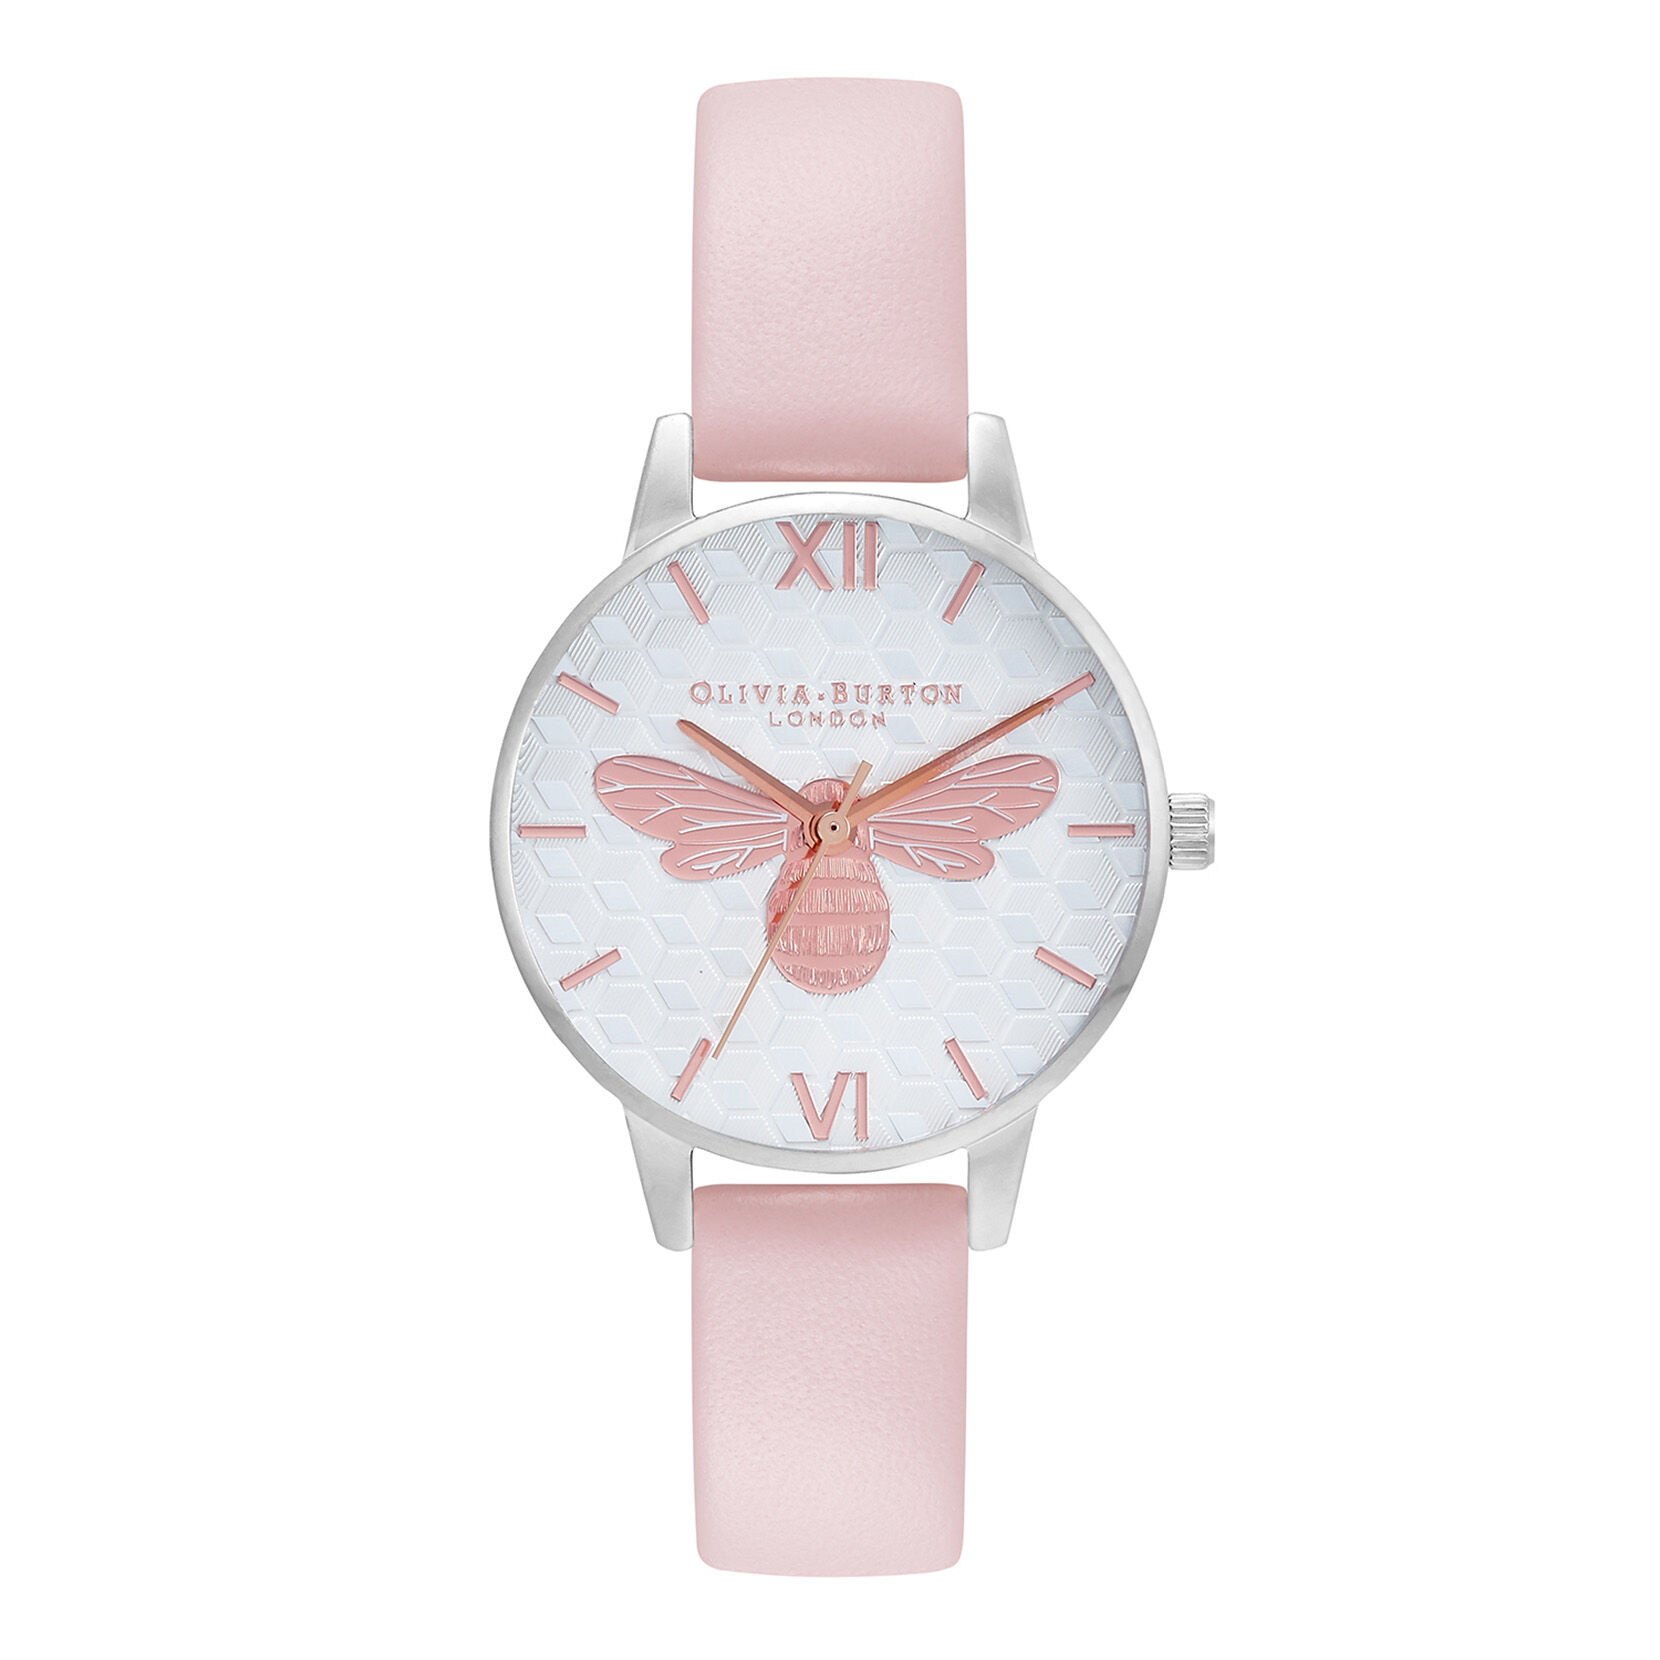 Honey Bee 30mm Silver & Pink Leather Strap Watch